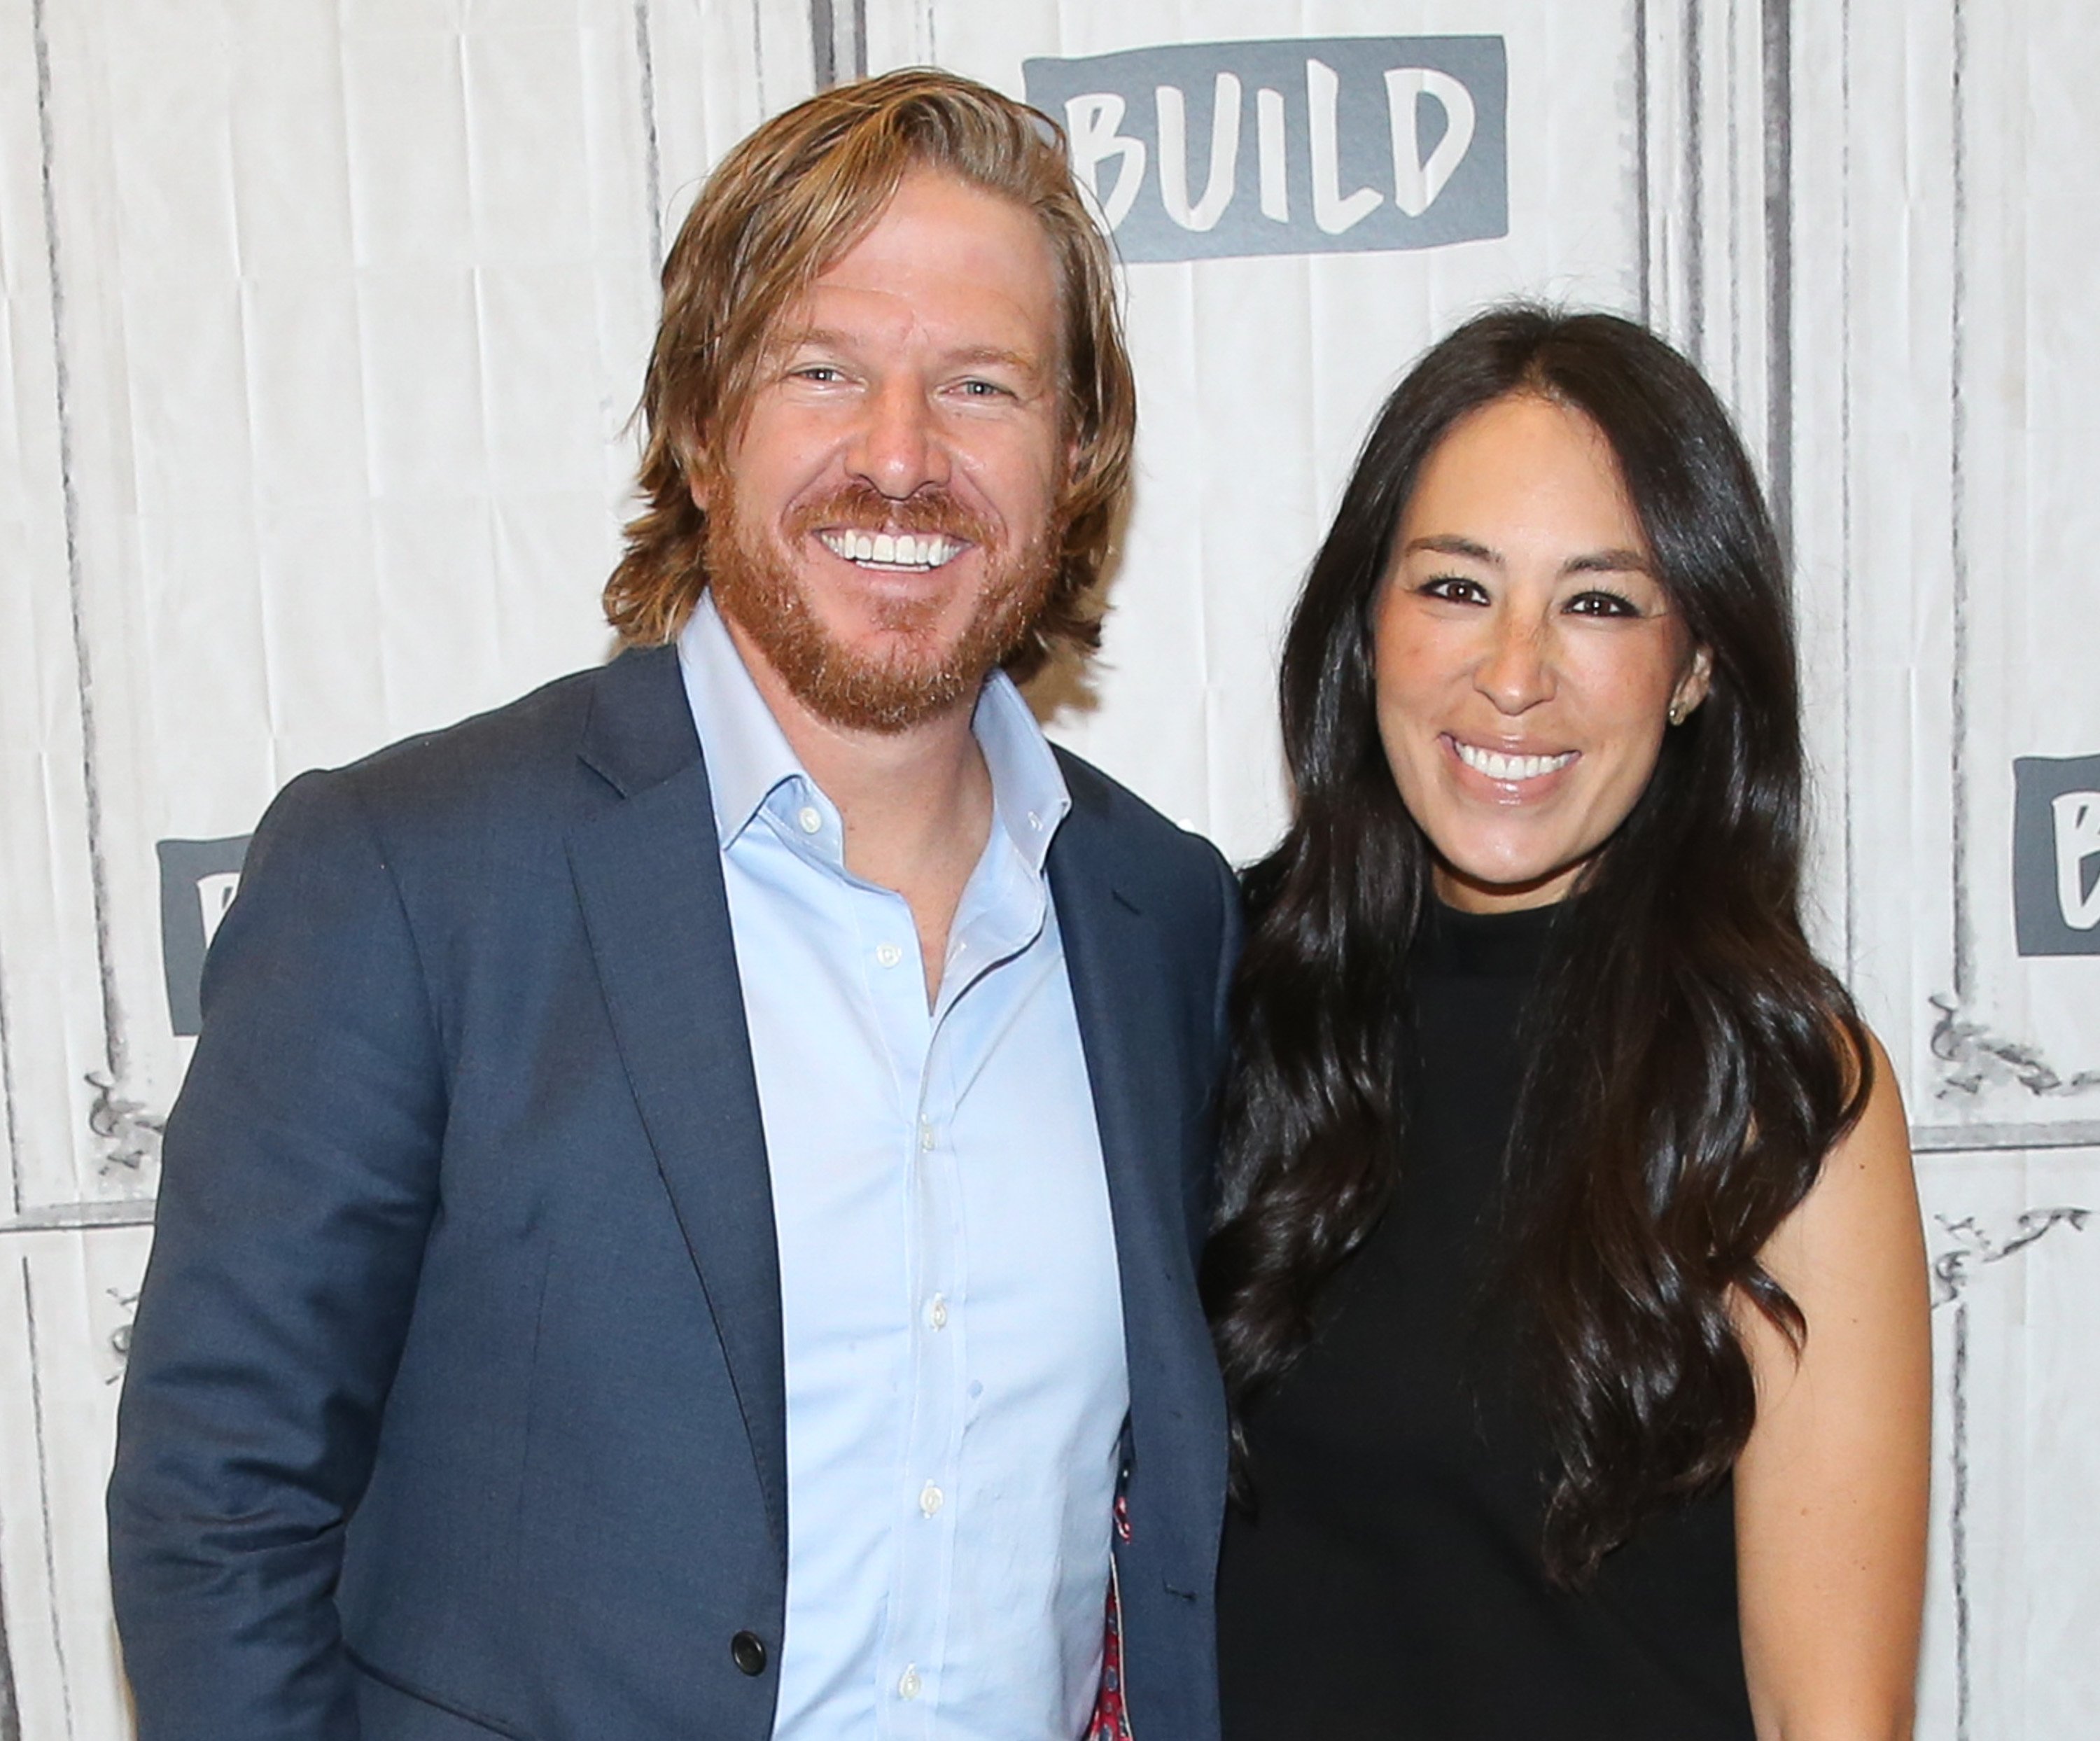 Chip Gaines and Joanna Gaines attend the Build Series at Build Studio on October 18, 2017 | Photo: GettyImages